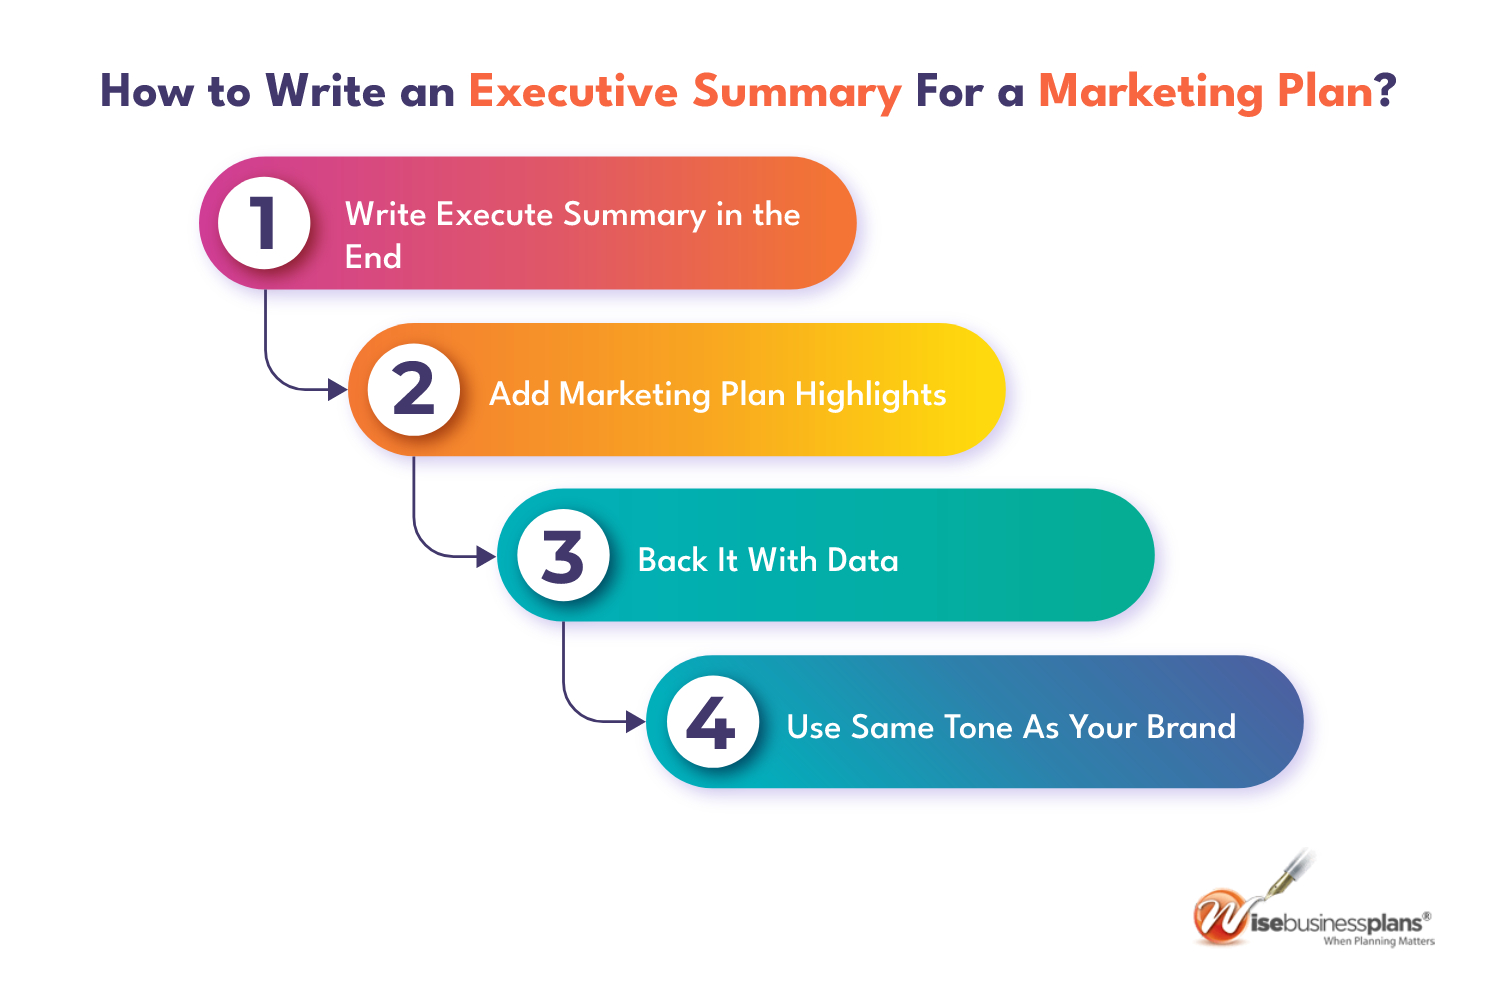 How to write an executive summary for a marketing plan